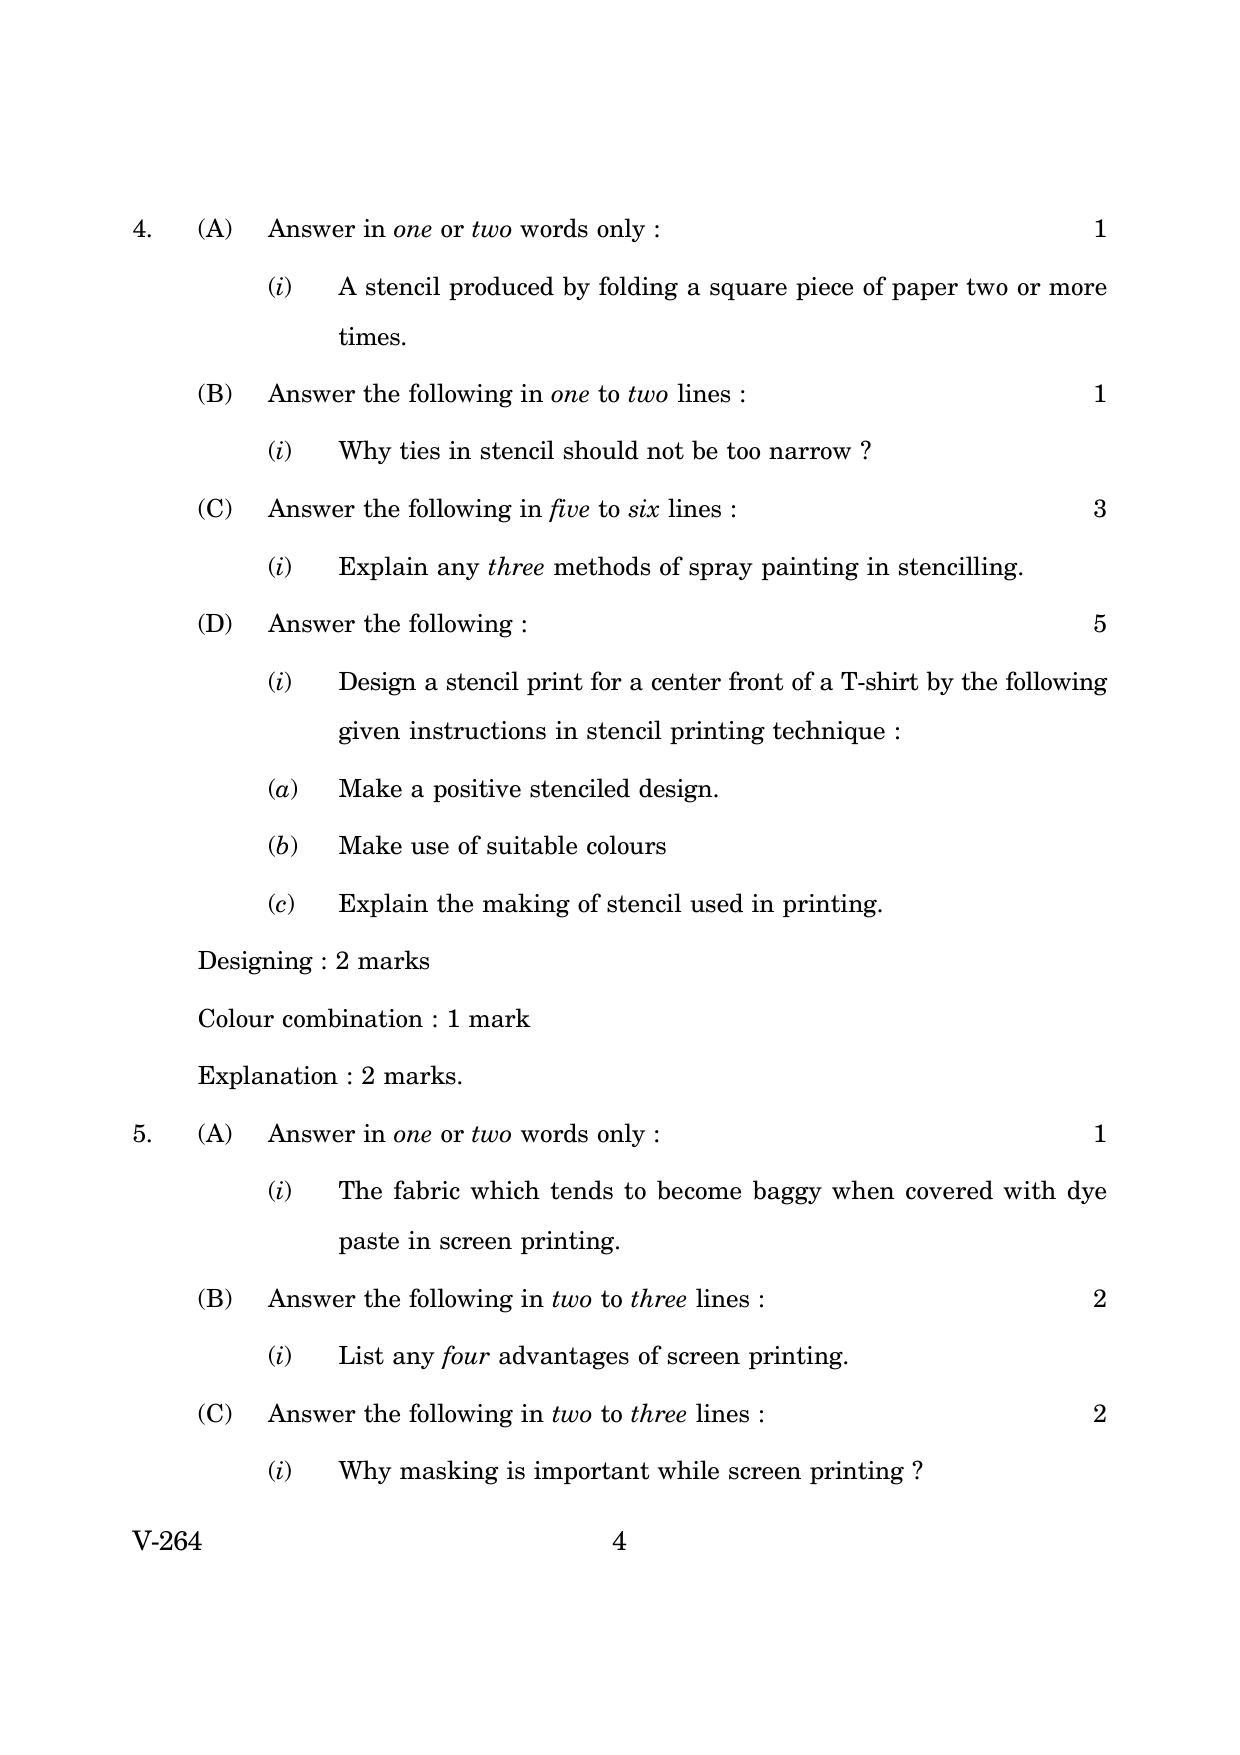 Goa Board Class 12 Dyeing and printing   (March 2019) Question Paper - Page 4